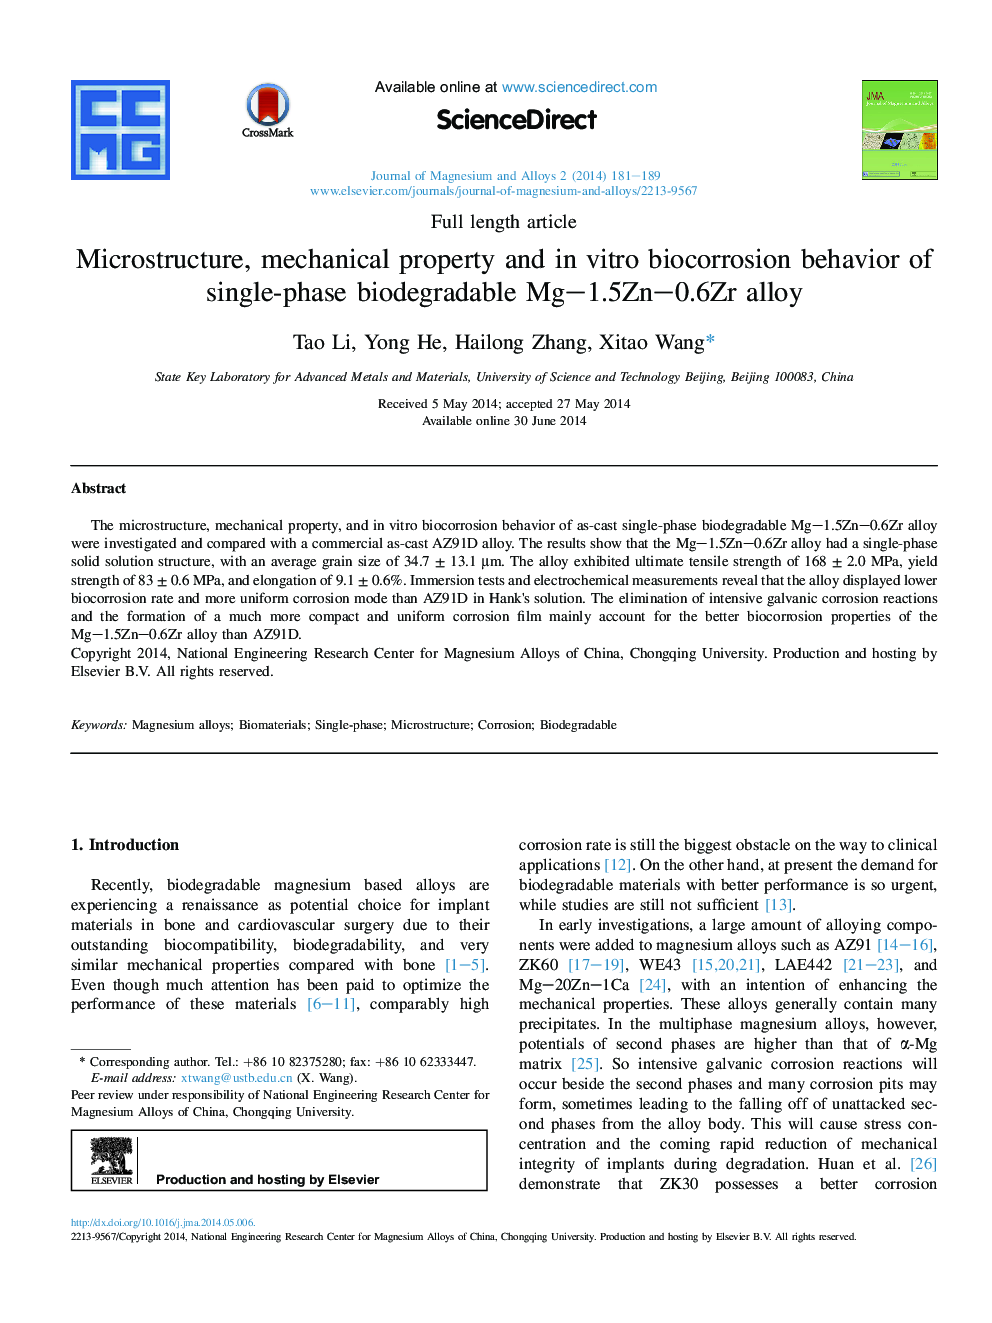 Microstructure, mechanical property and inÂ vitro biocorrosion behavior of single-phase biodegradable Mg-1.5Zn-0.6Zr alloy